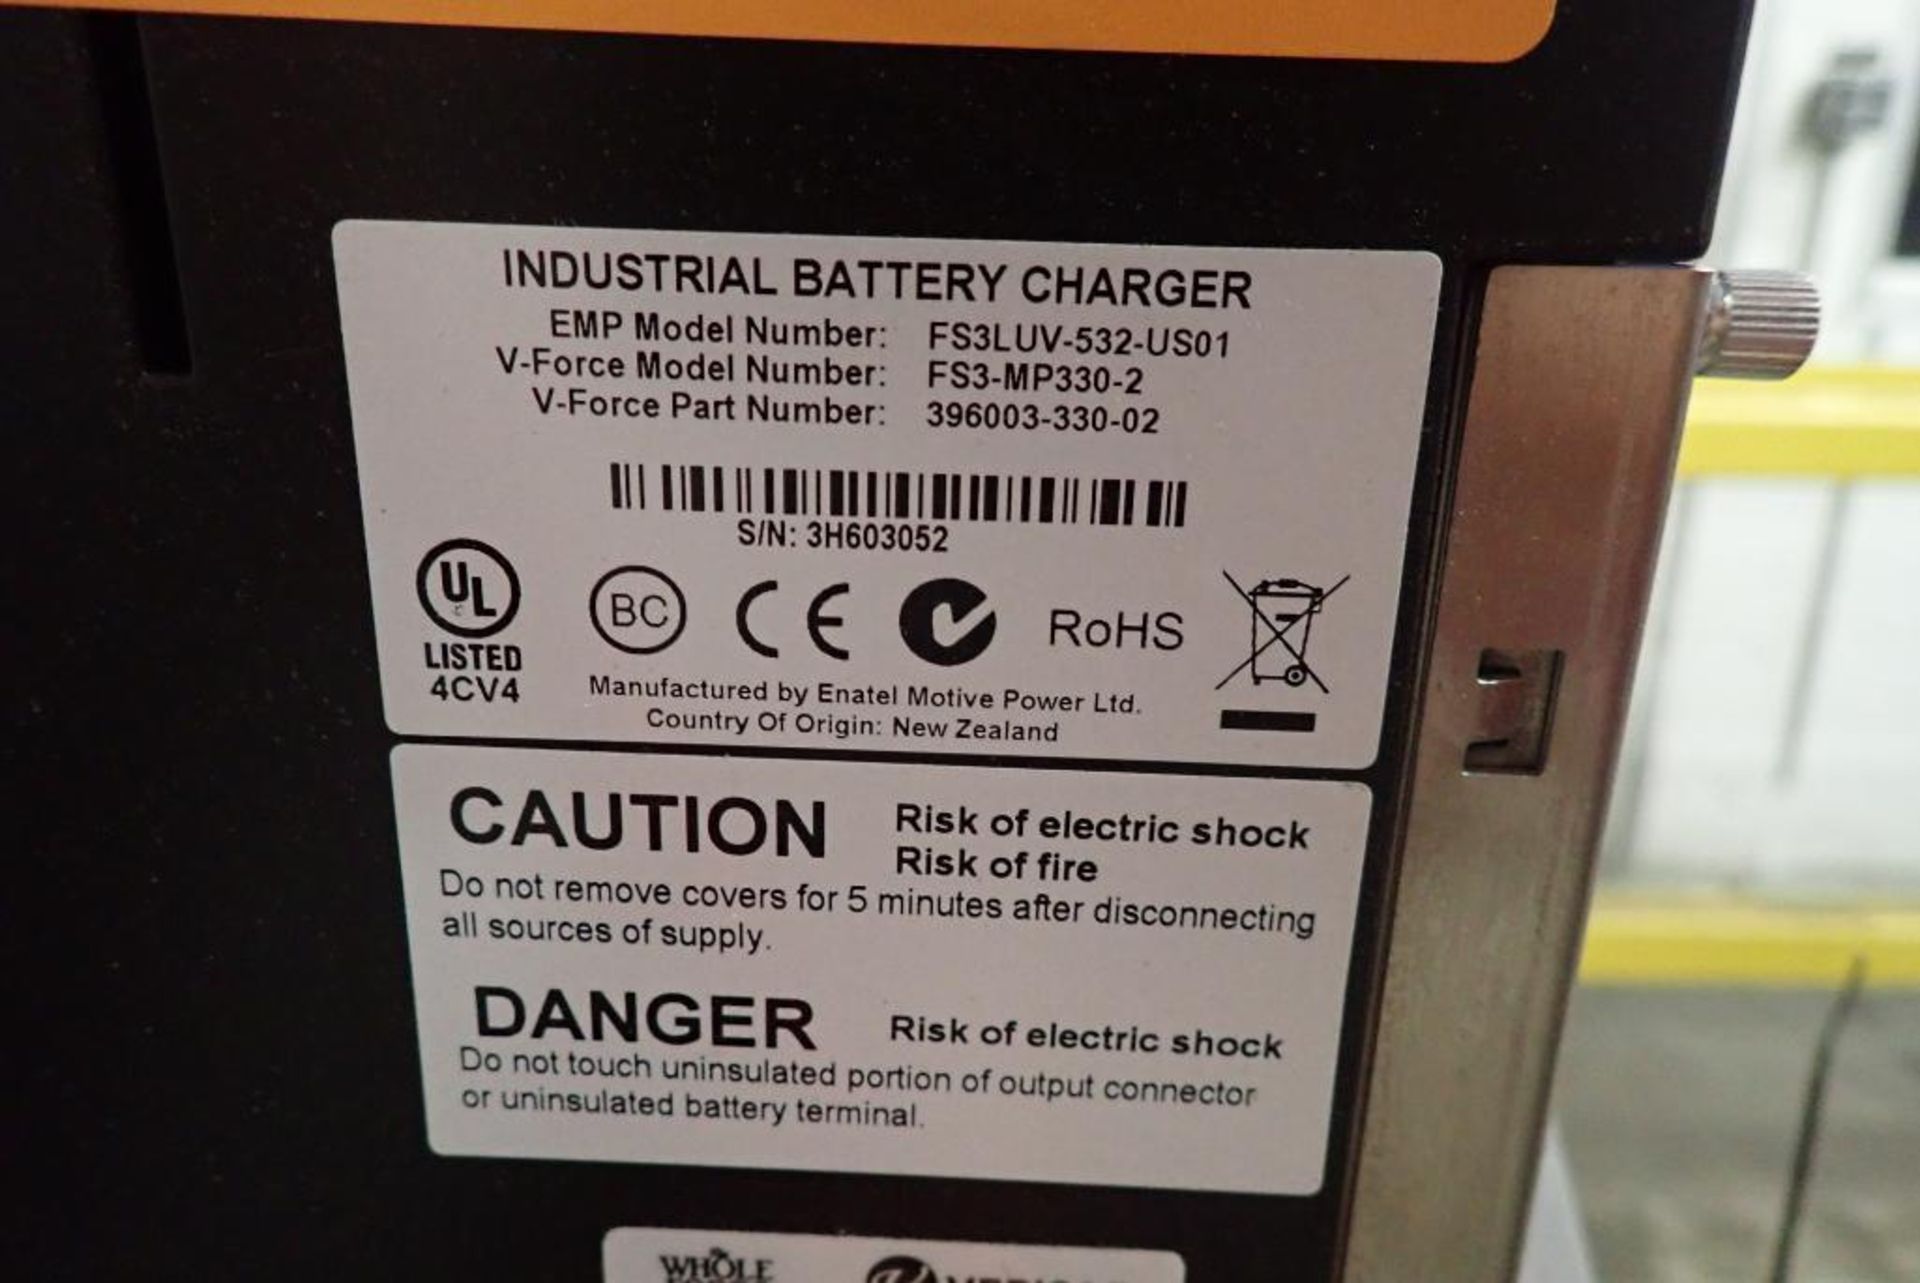 V-Force industrial battery charger - Image 6 of 6